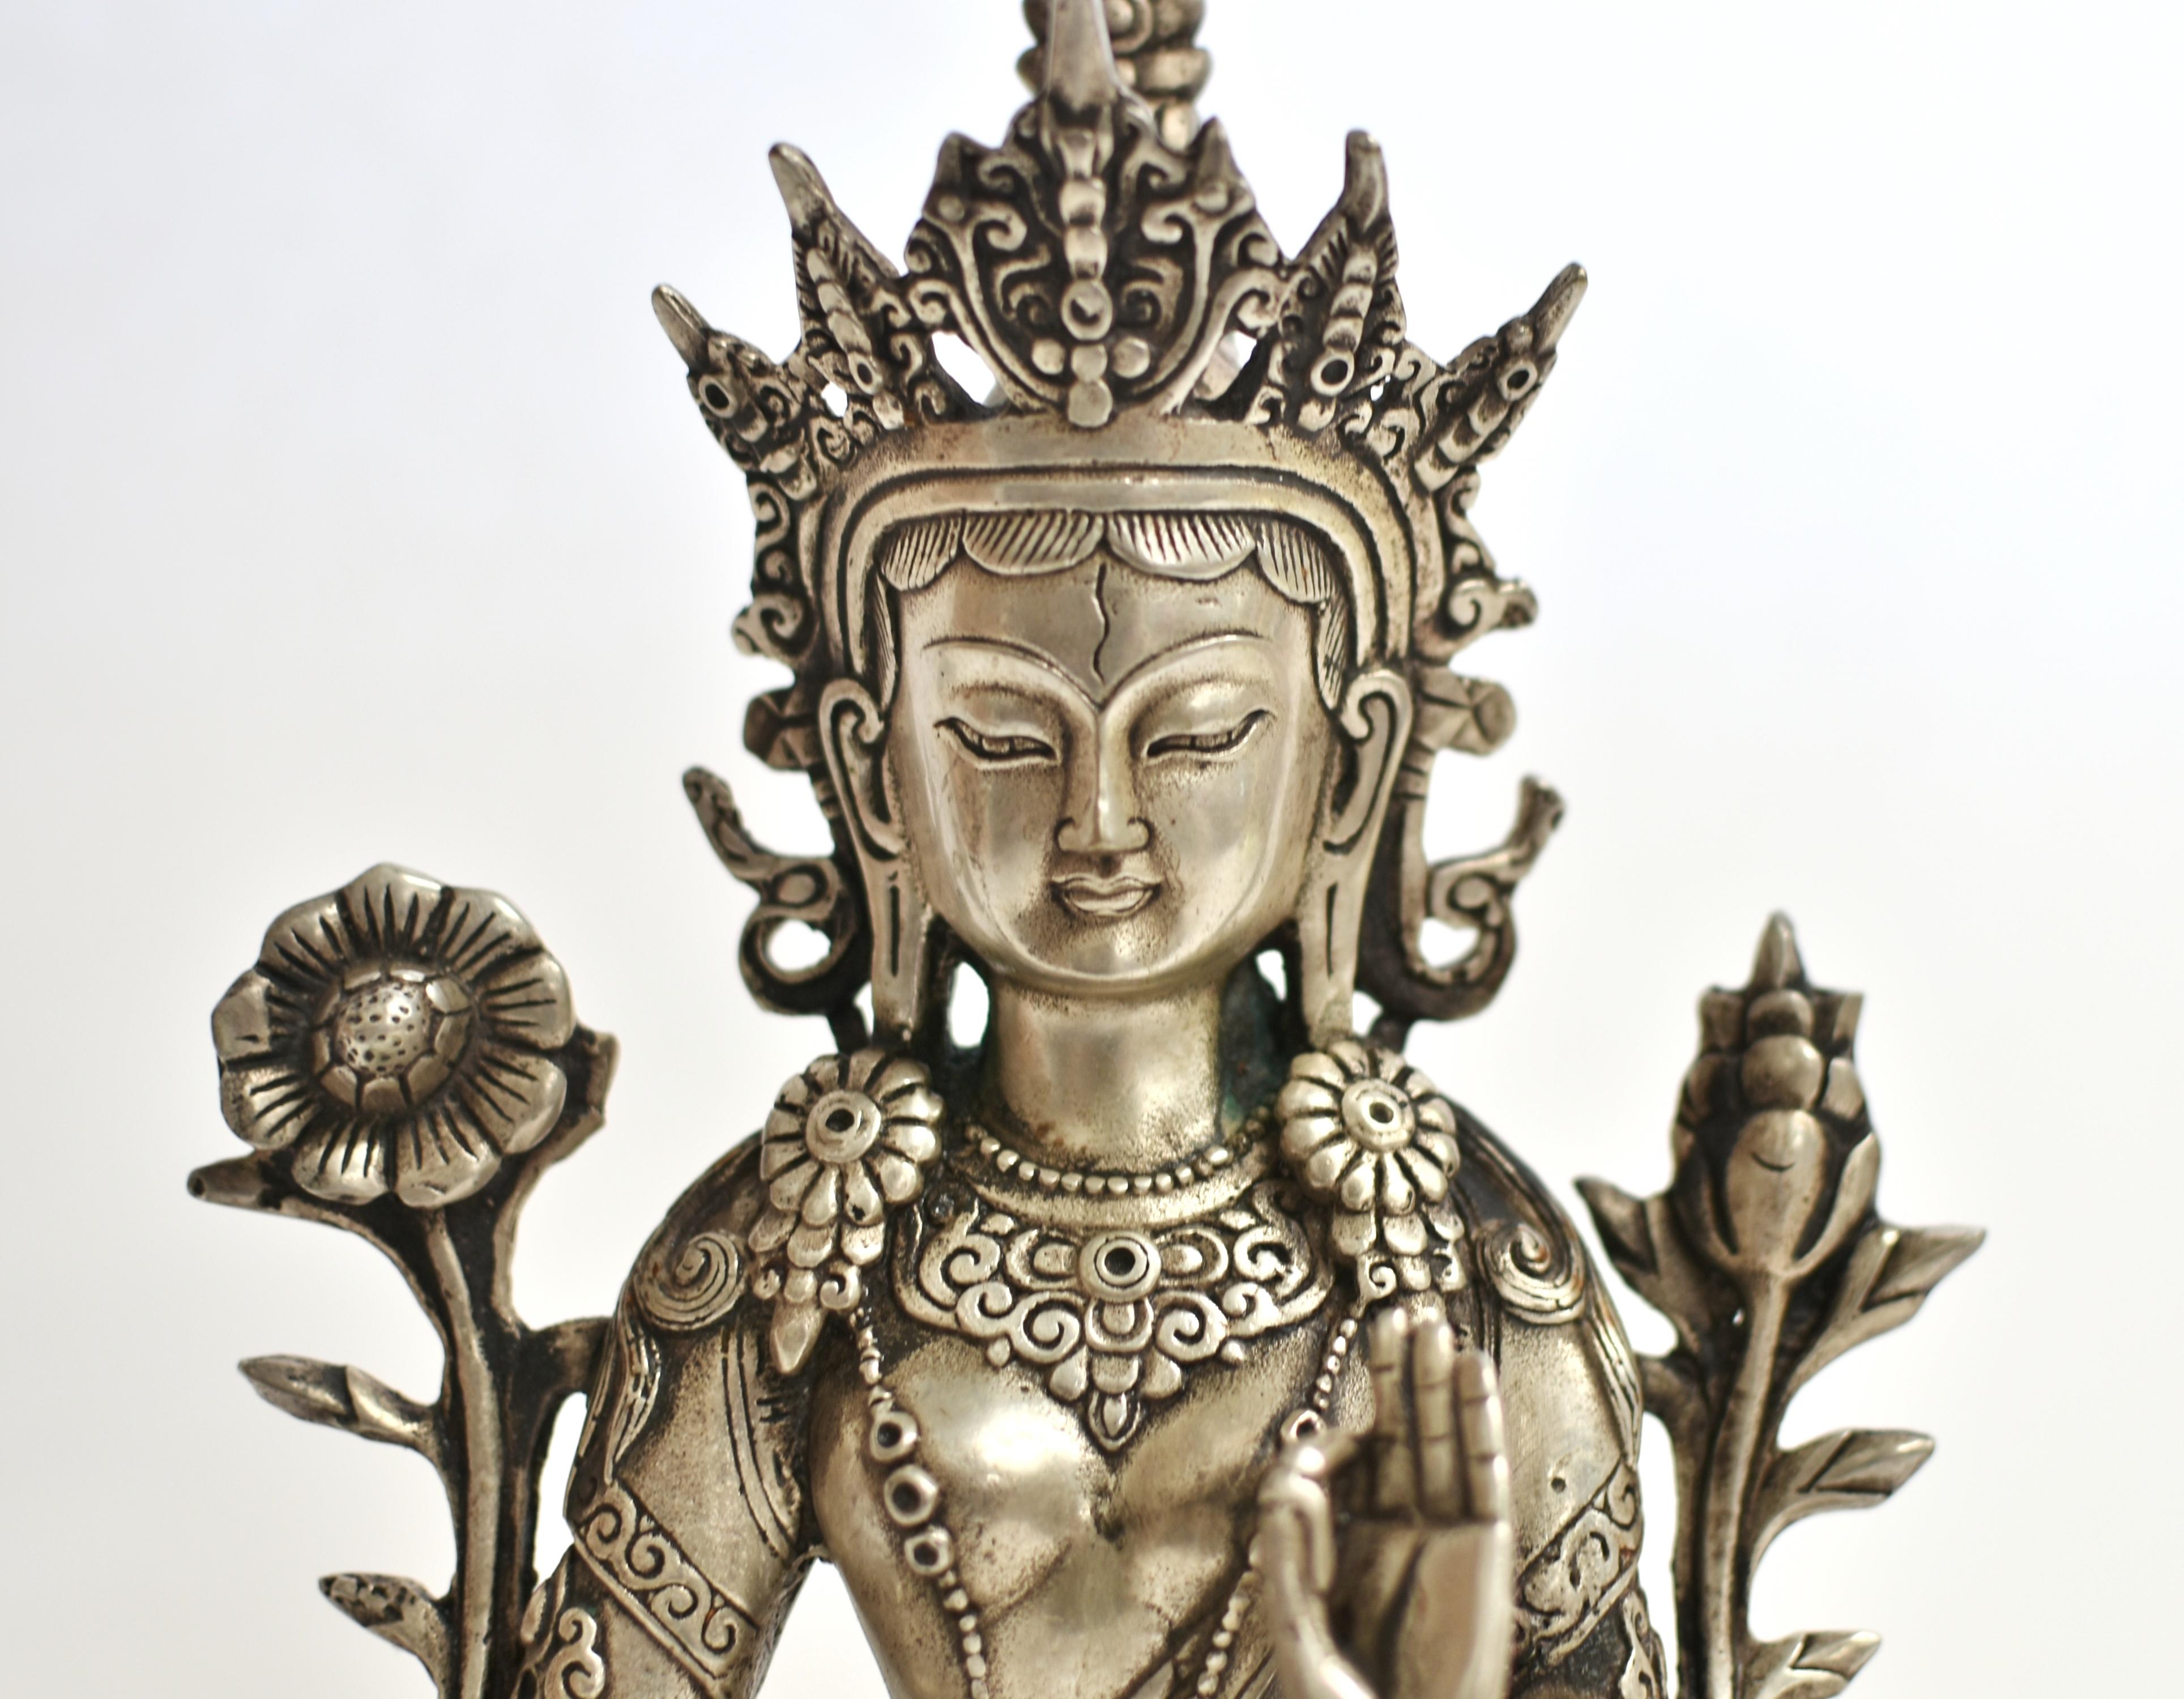 A beautiful silver bronze White Tara statue. The serene face with large downcast eyes under arched eyebrows above pursed lips, flanked by long earlobes, all under hair neatly tied and adorned with an elaborate crown. Extra eyes between the brows, on